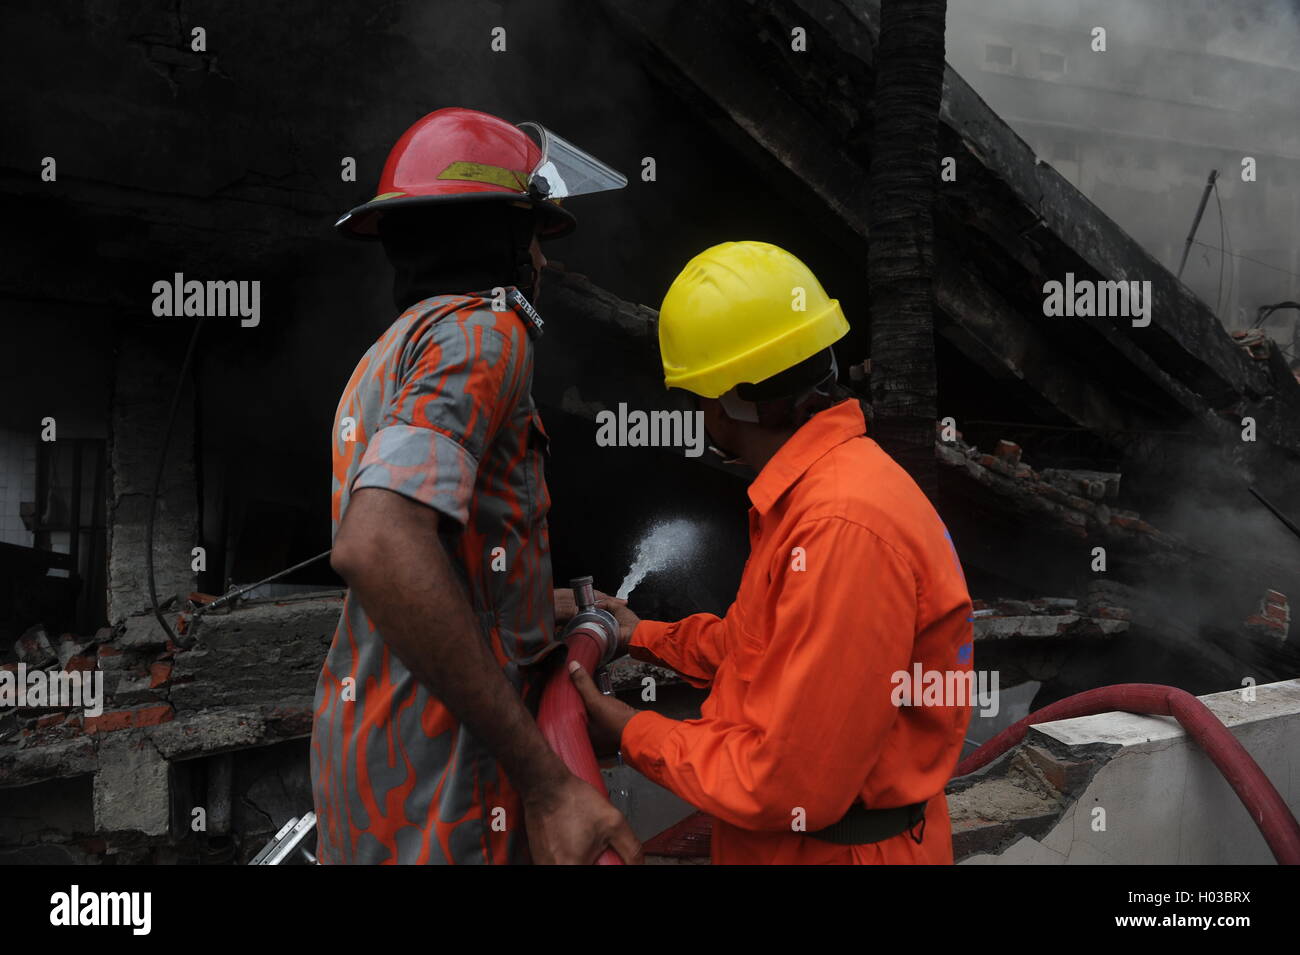 Firefighters are working to put out a fire at a Tampaco packaging factory in Tongi industrial area outside Dhaka, Bangladesh. Stock Photo